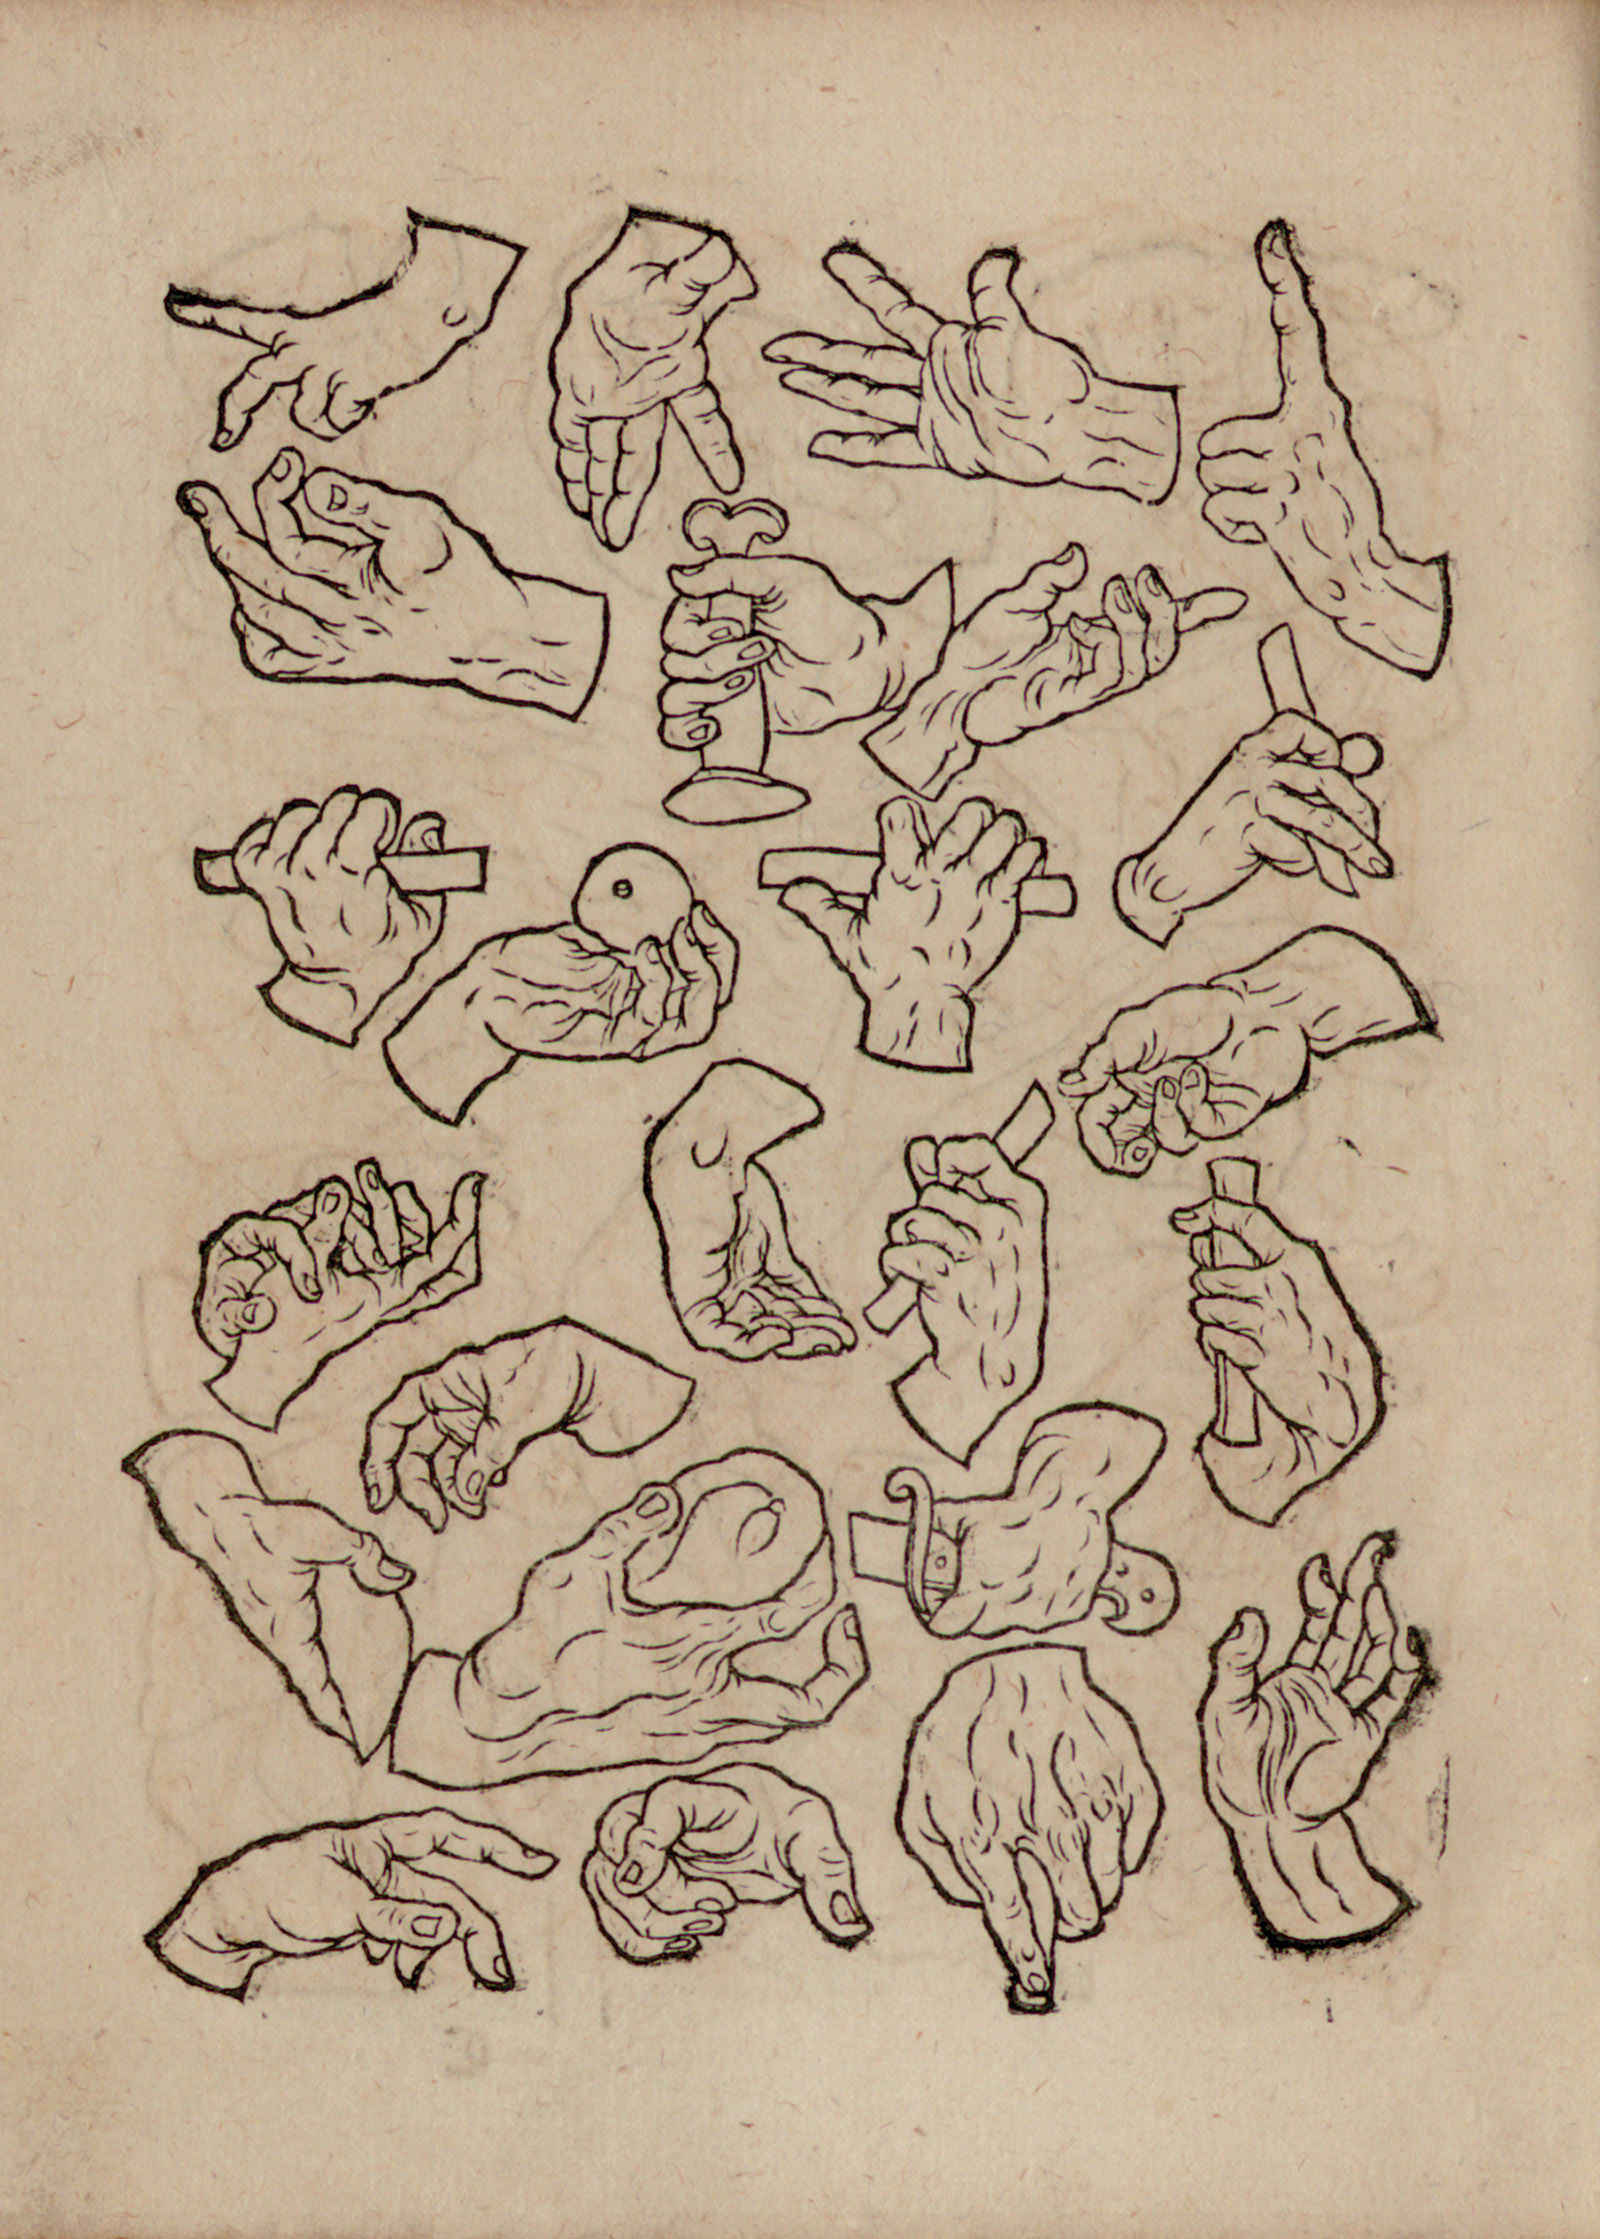 illustration of hands in various actions of holding, grasping, pointing, gesturing